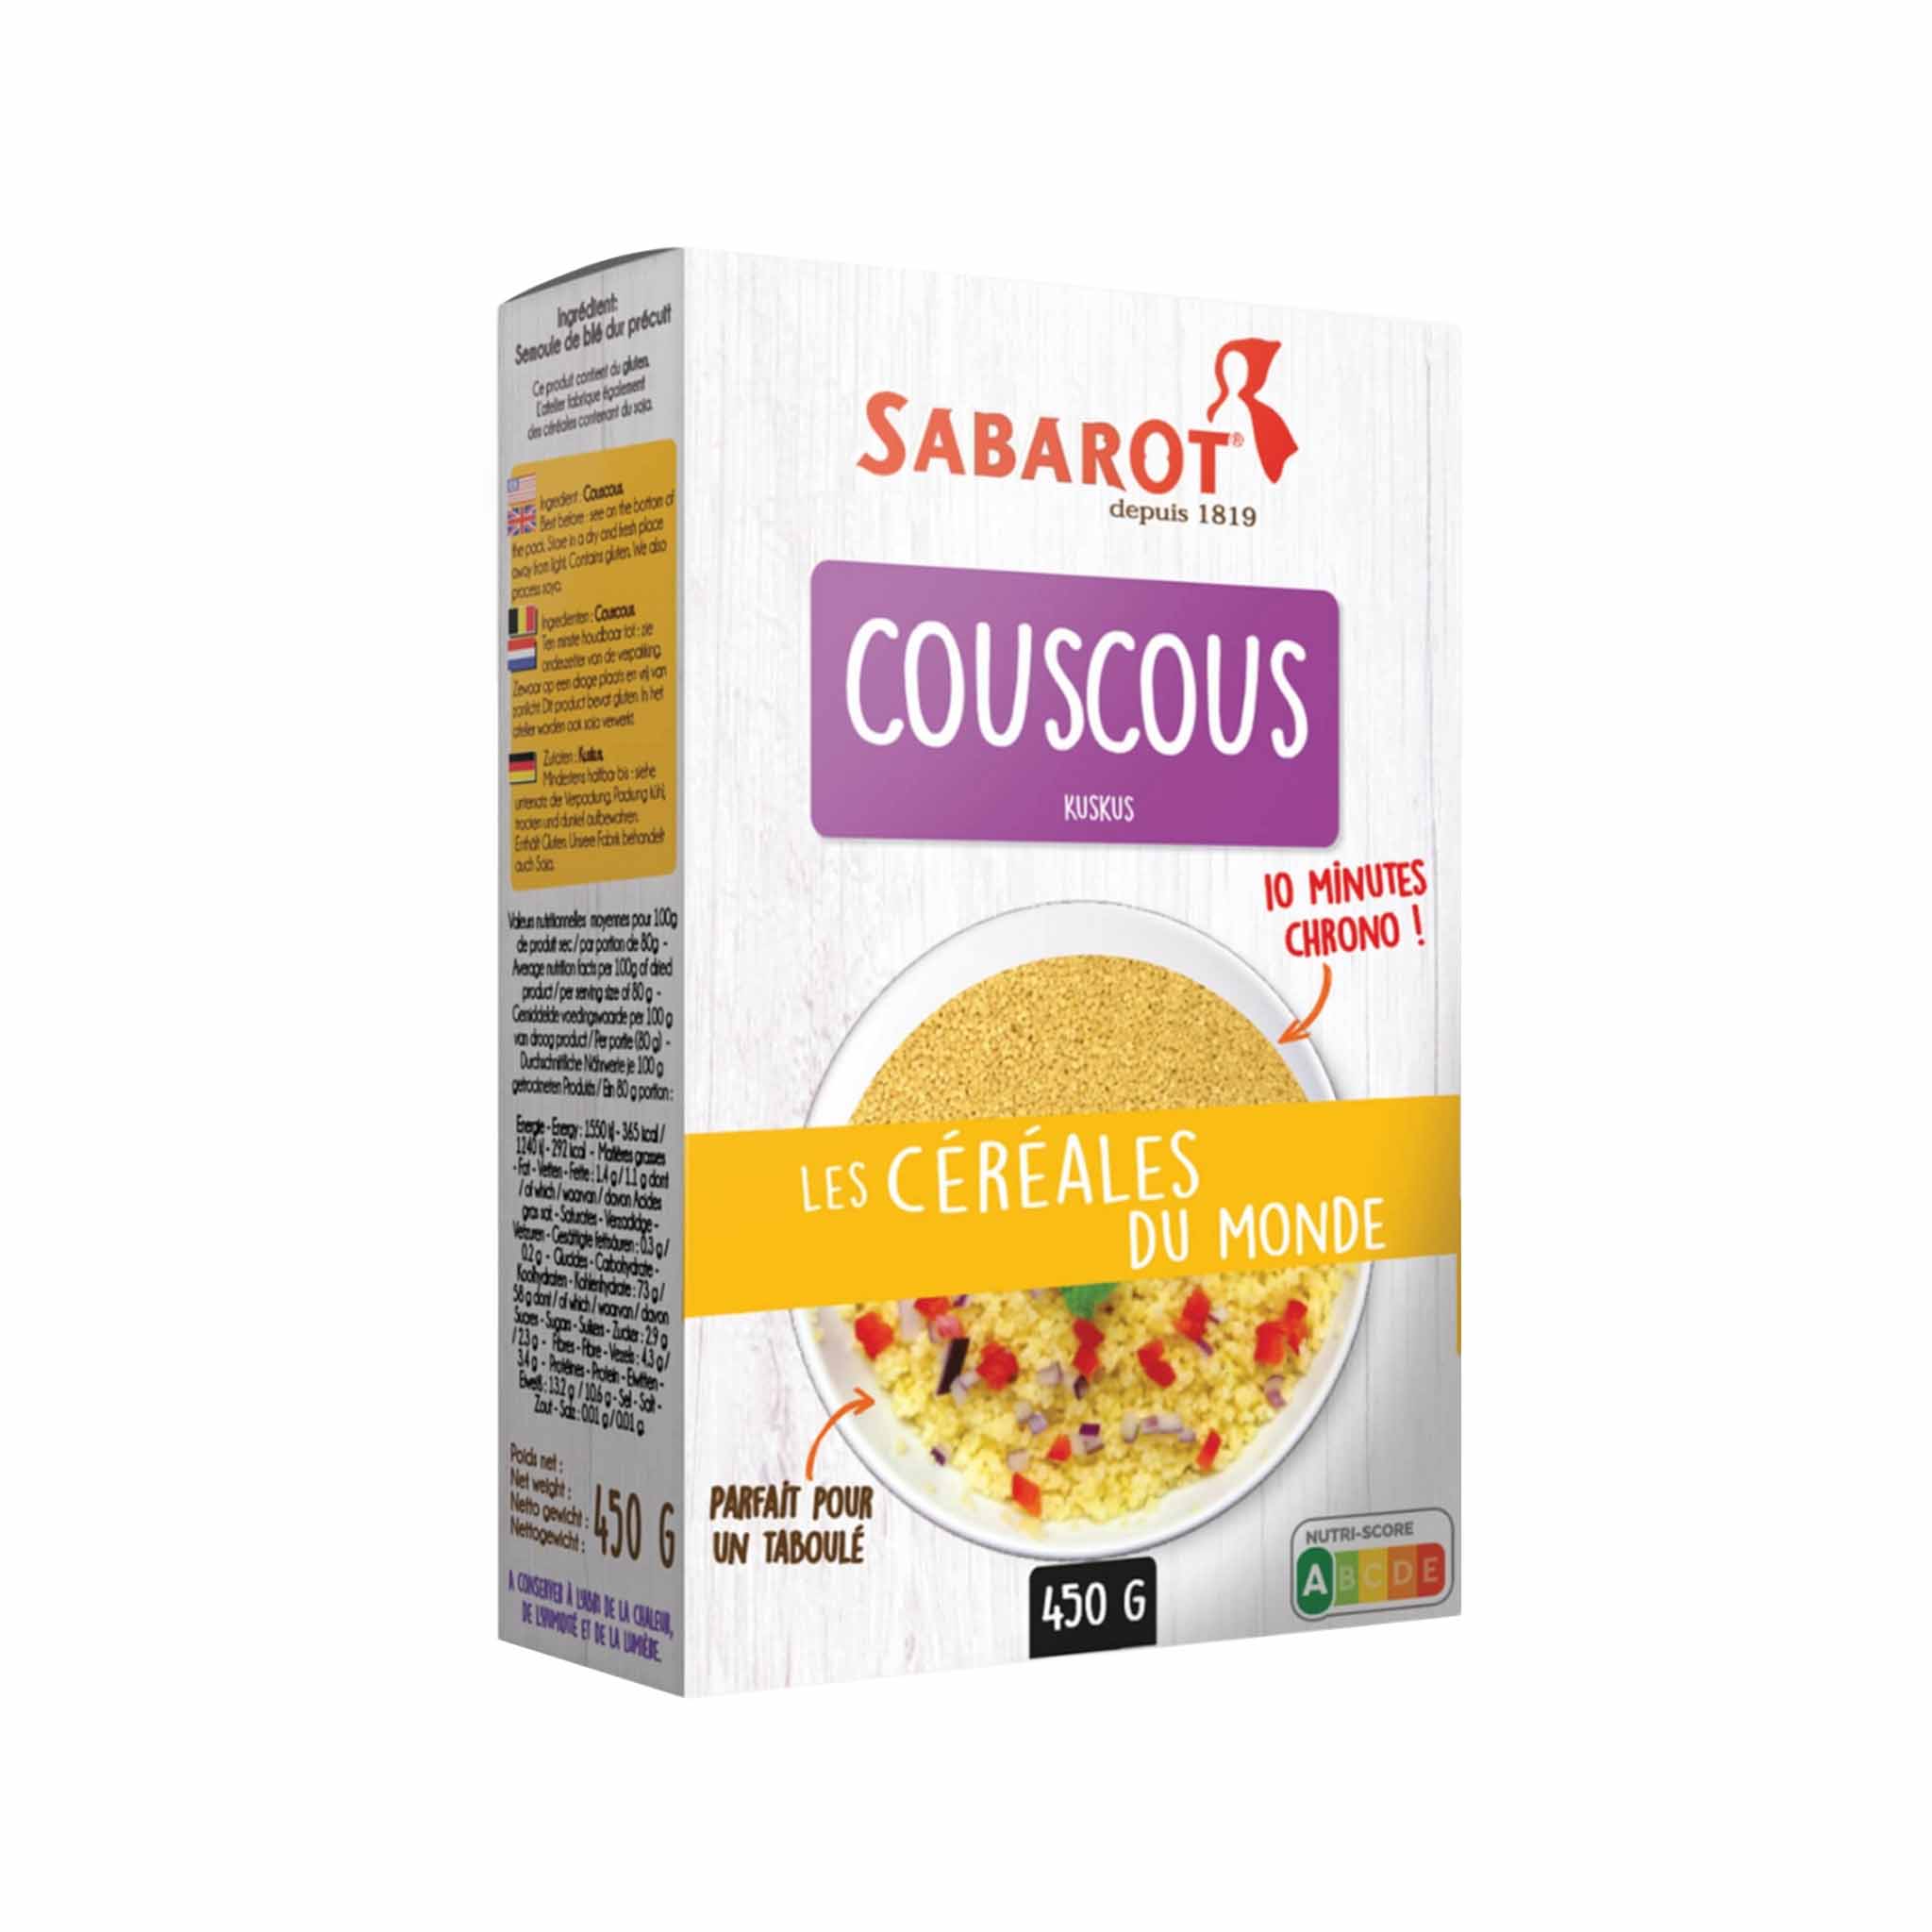 Sabarot Couscous in a Box